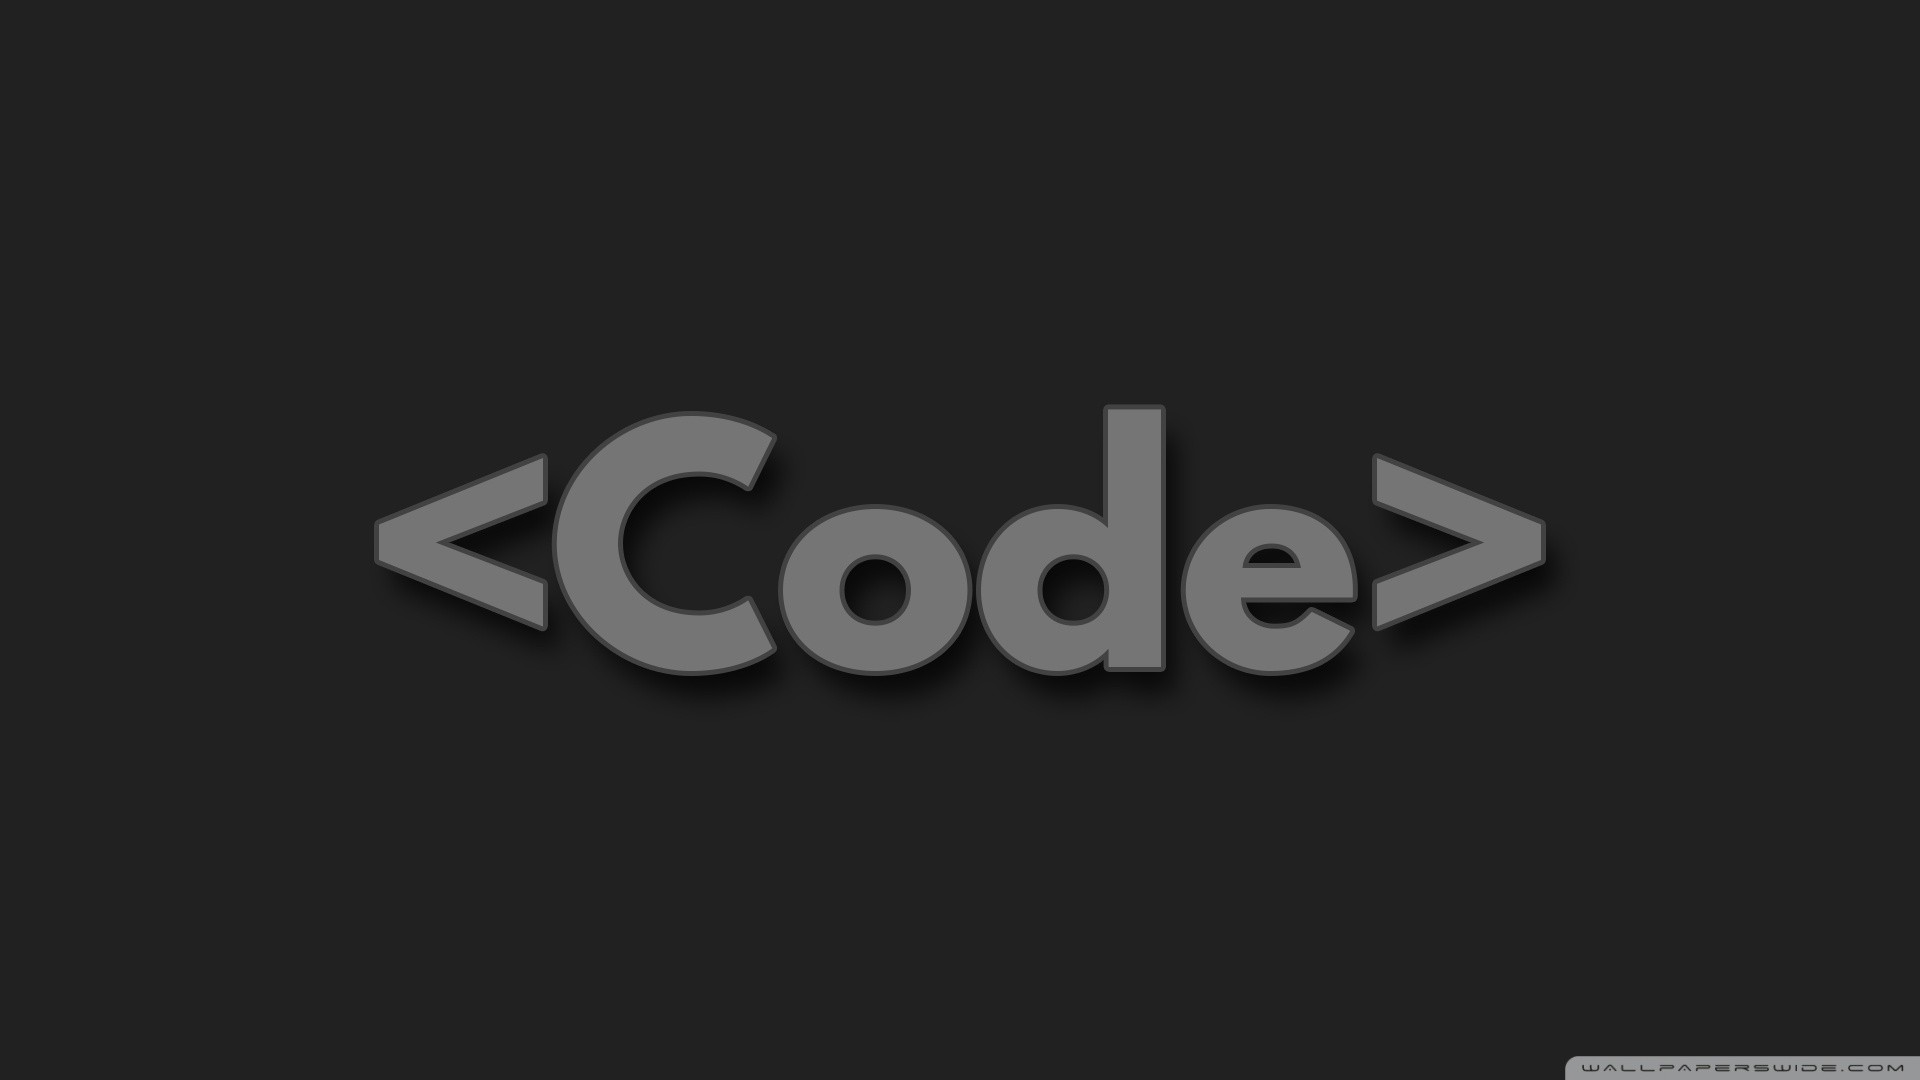 Coding wallpaper ·① Download free beautiful full HD wallpapers for desktop and mobile devices in